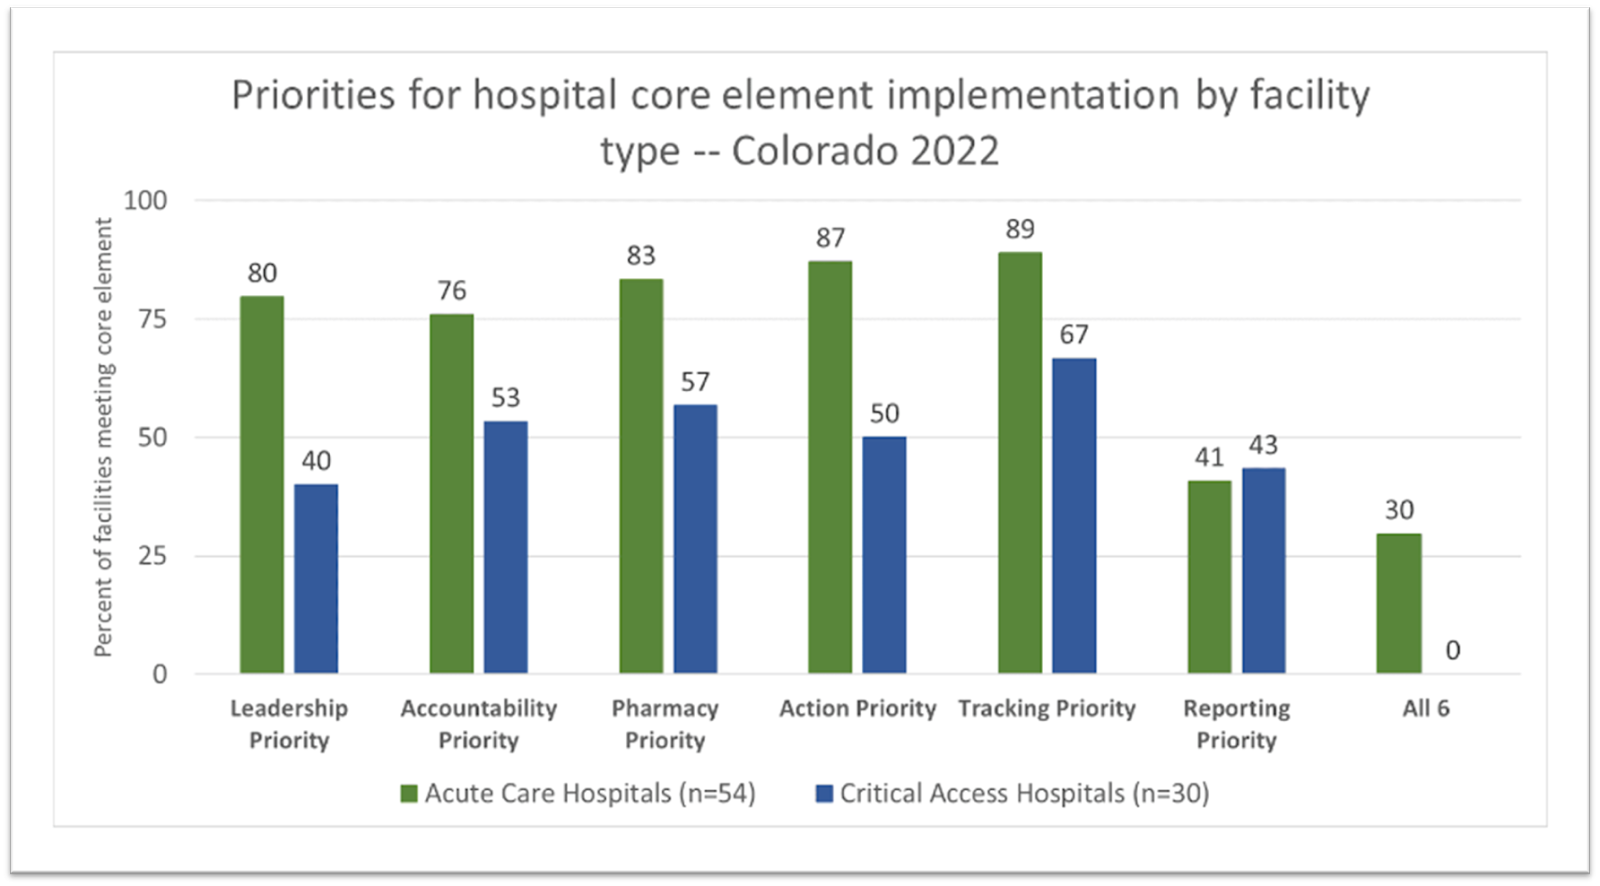 hospital priorities chart. go to image link for details.